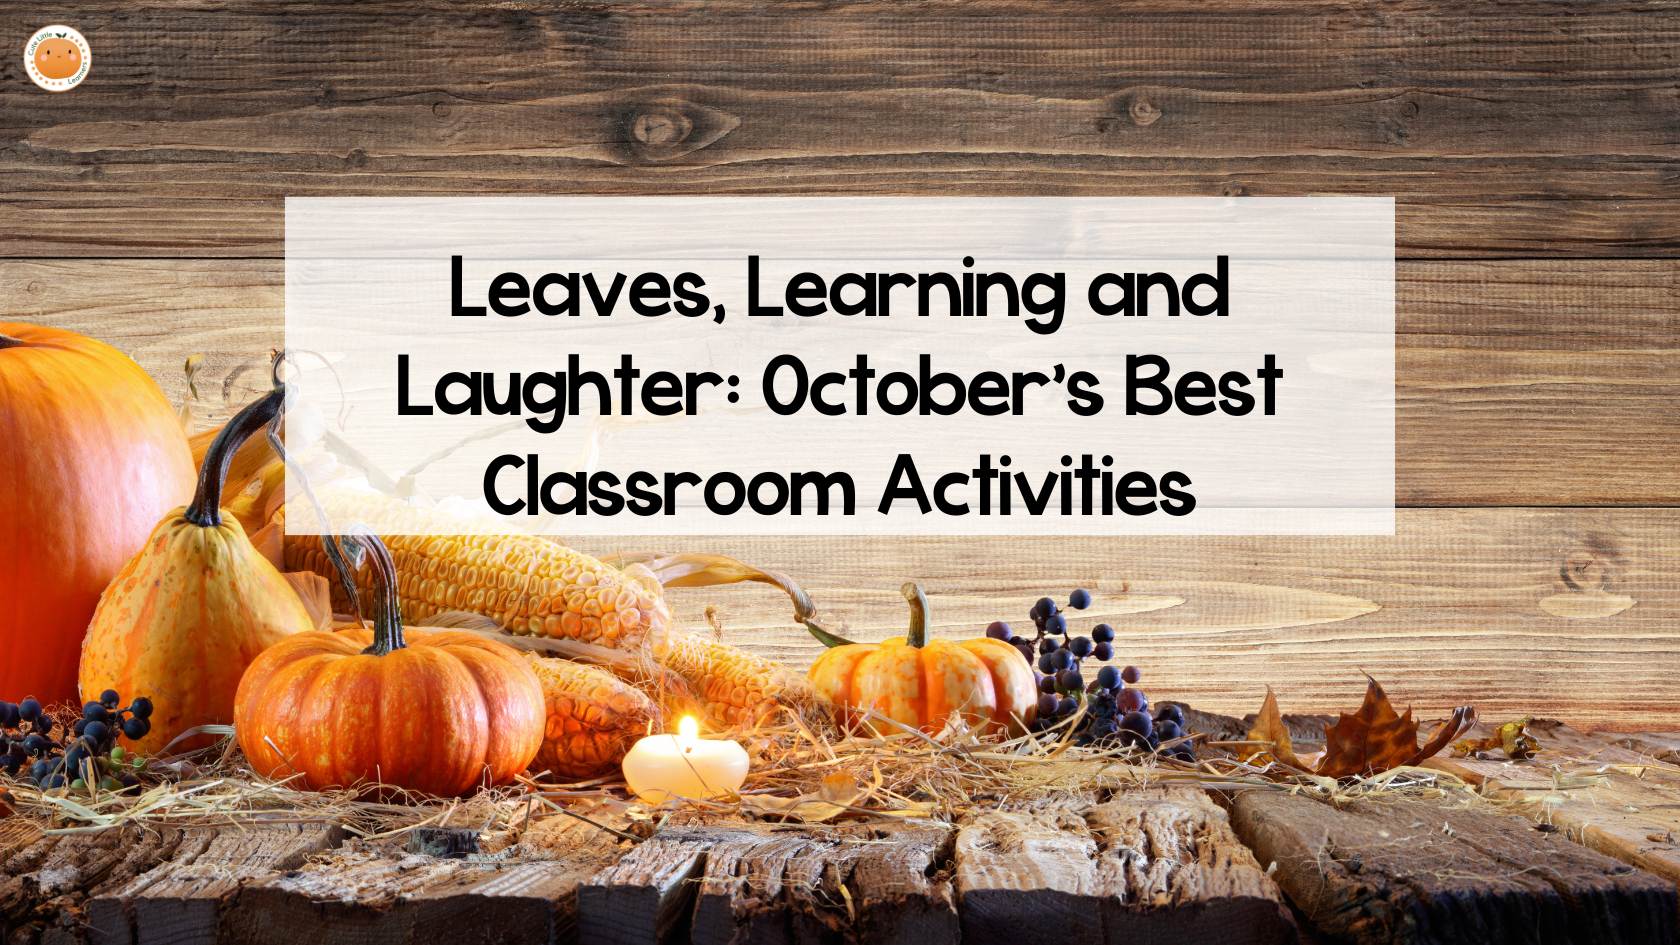 Leaves, Learning, and Laughter: October's Best Classroom Activities